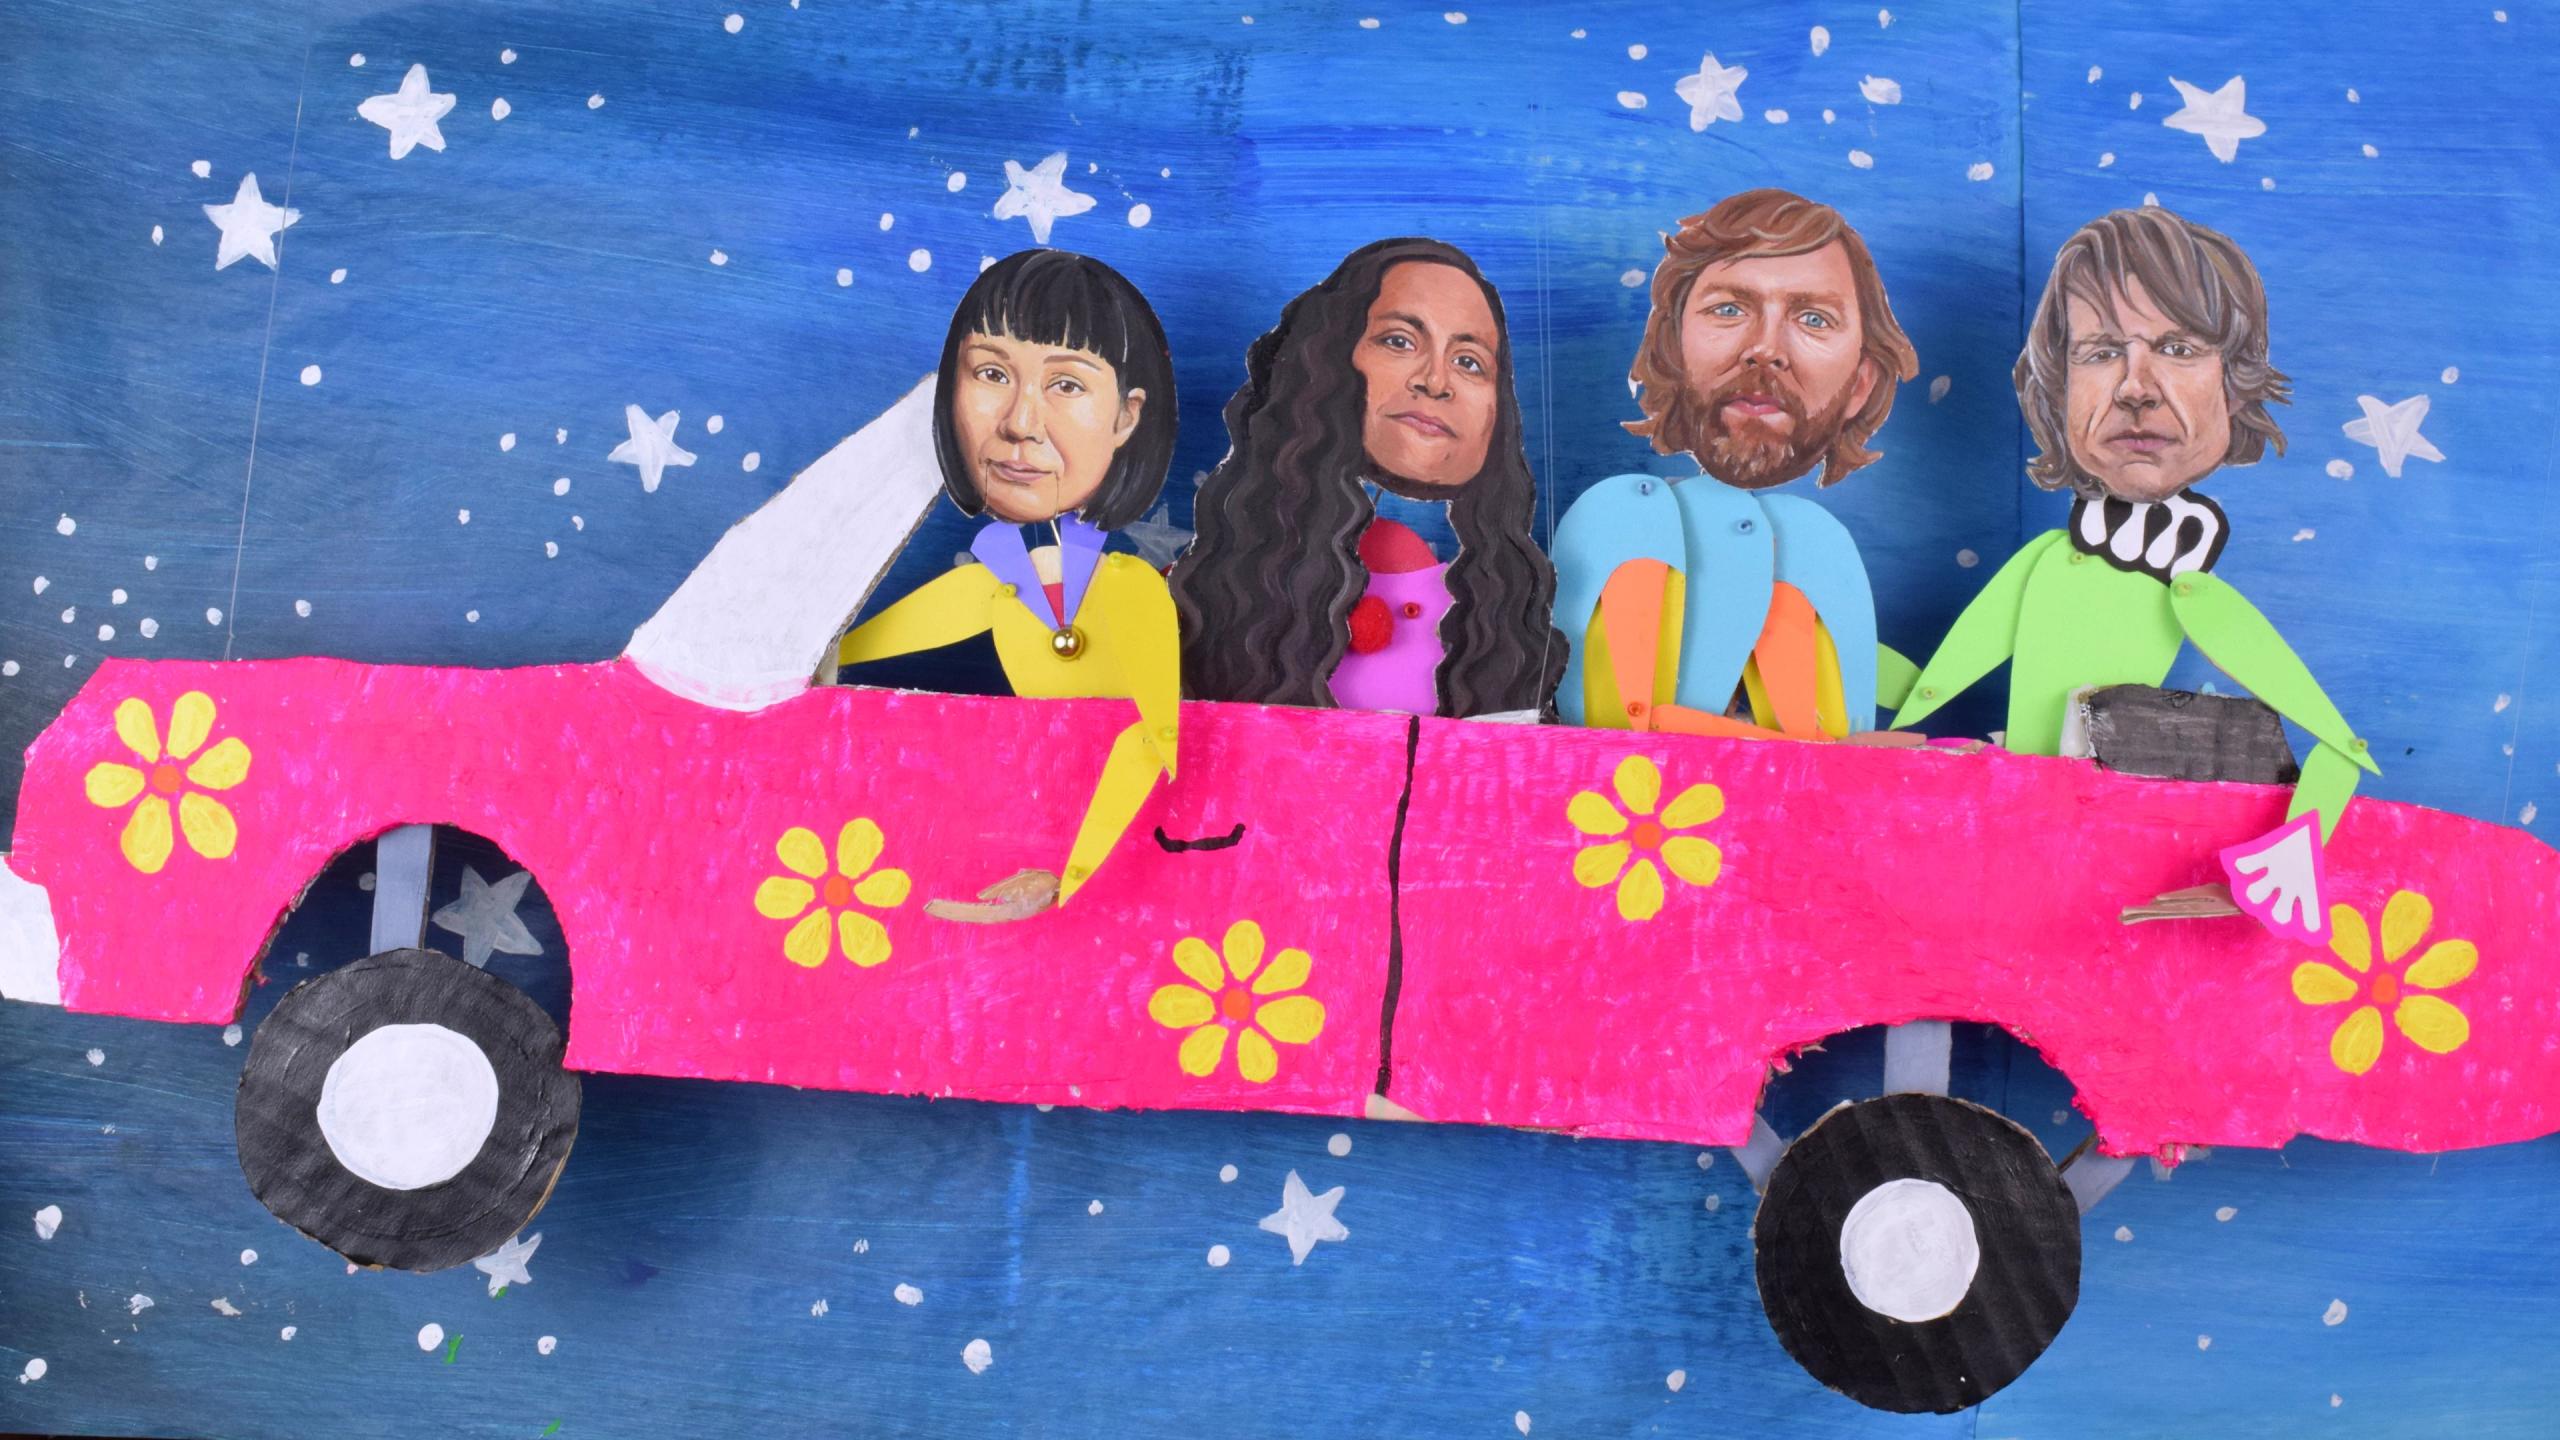 A collage of painted cardboard pictures. A pink convertible with yellow flowers against a blue background with white stars. In the car are two women and two men.